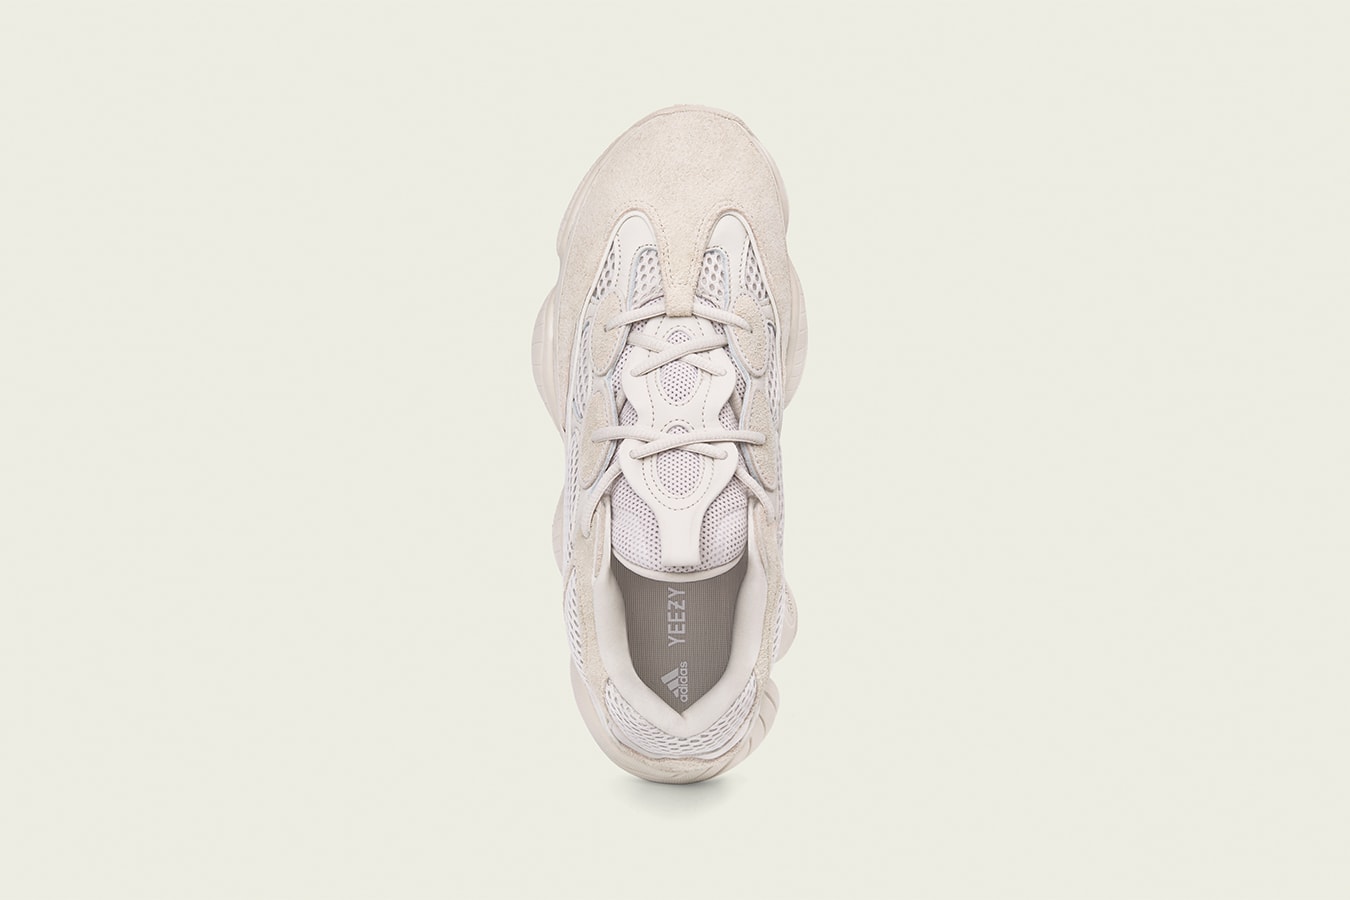 adidas Originals YEEZY 500 Blush Kanye West adidas Sneakers Shoes Release Date Info Drops February 14 16 17 2018 Los Angeles 747 Warehouse Street Confirmed App